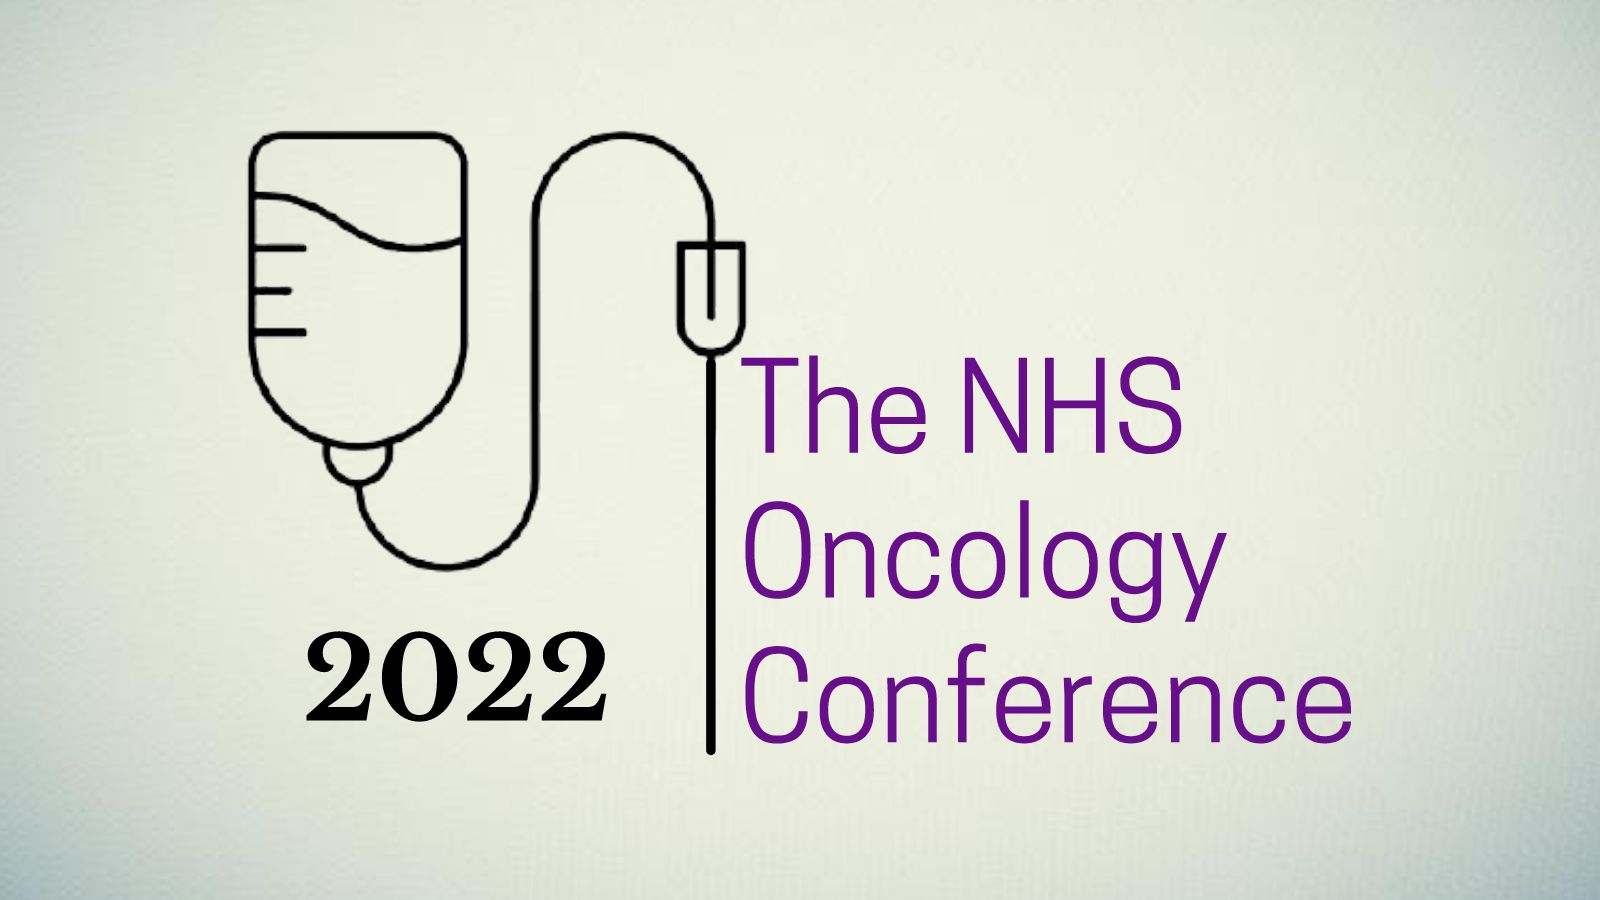 Convenzis Event The NHS Oncology Conference 2022 London